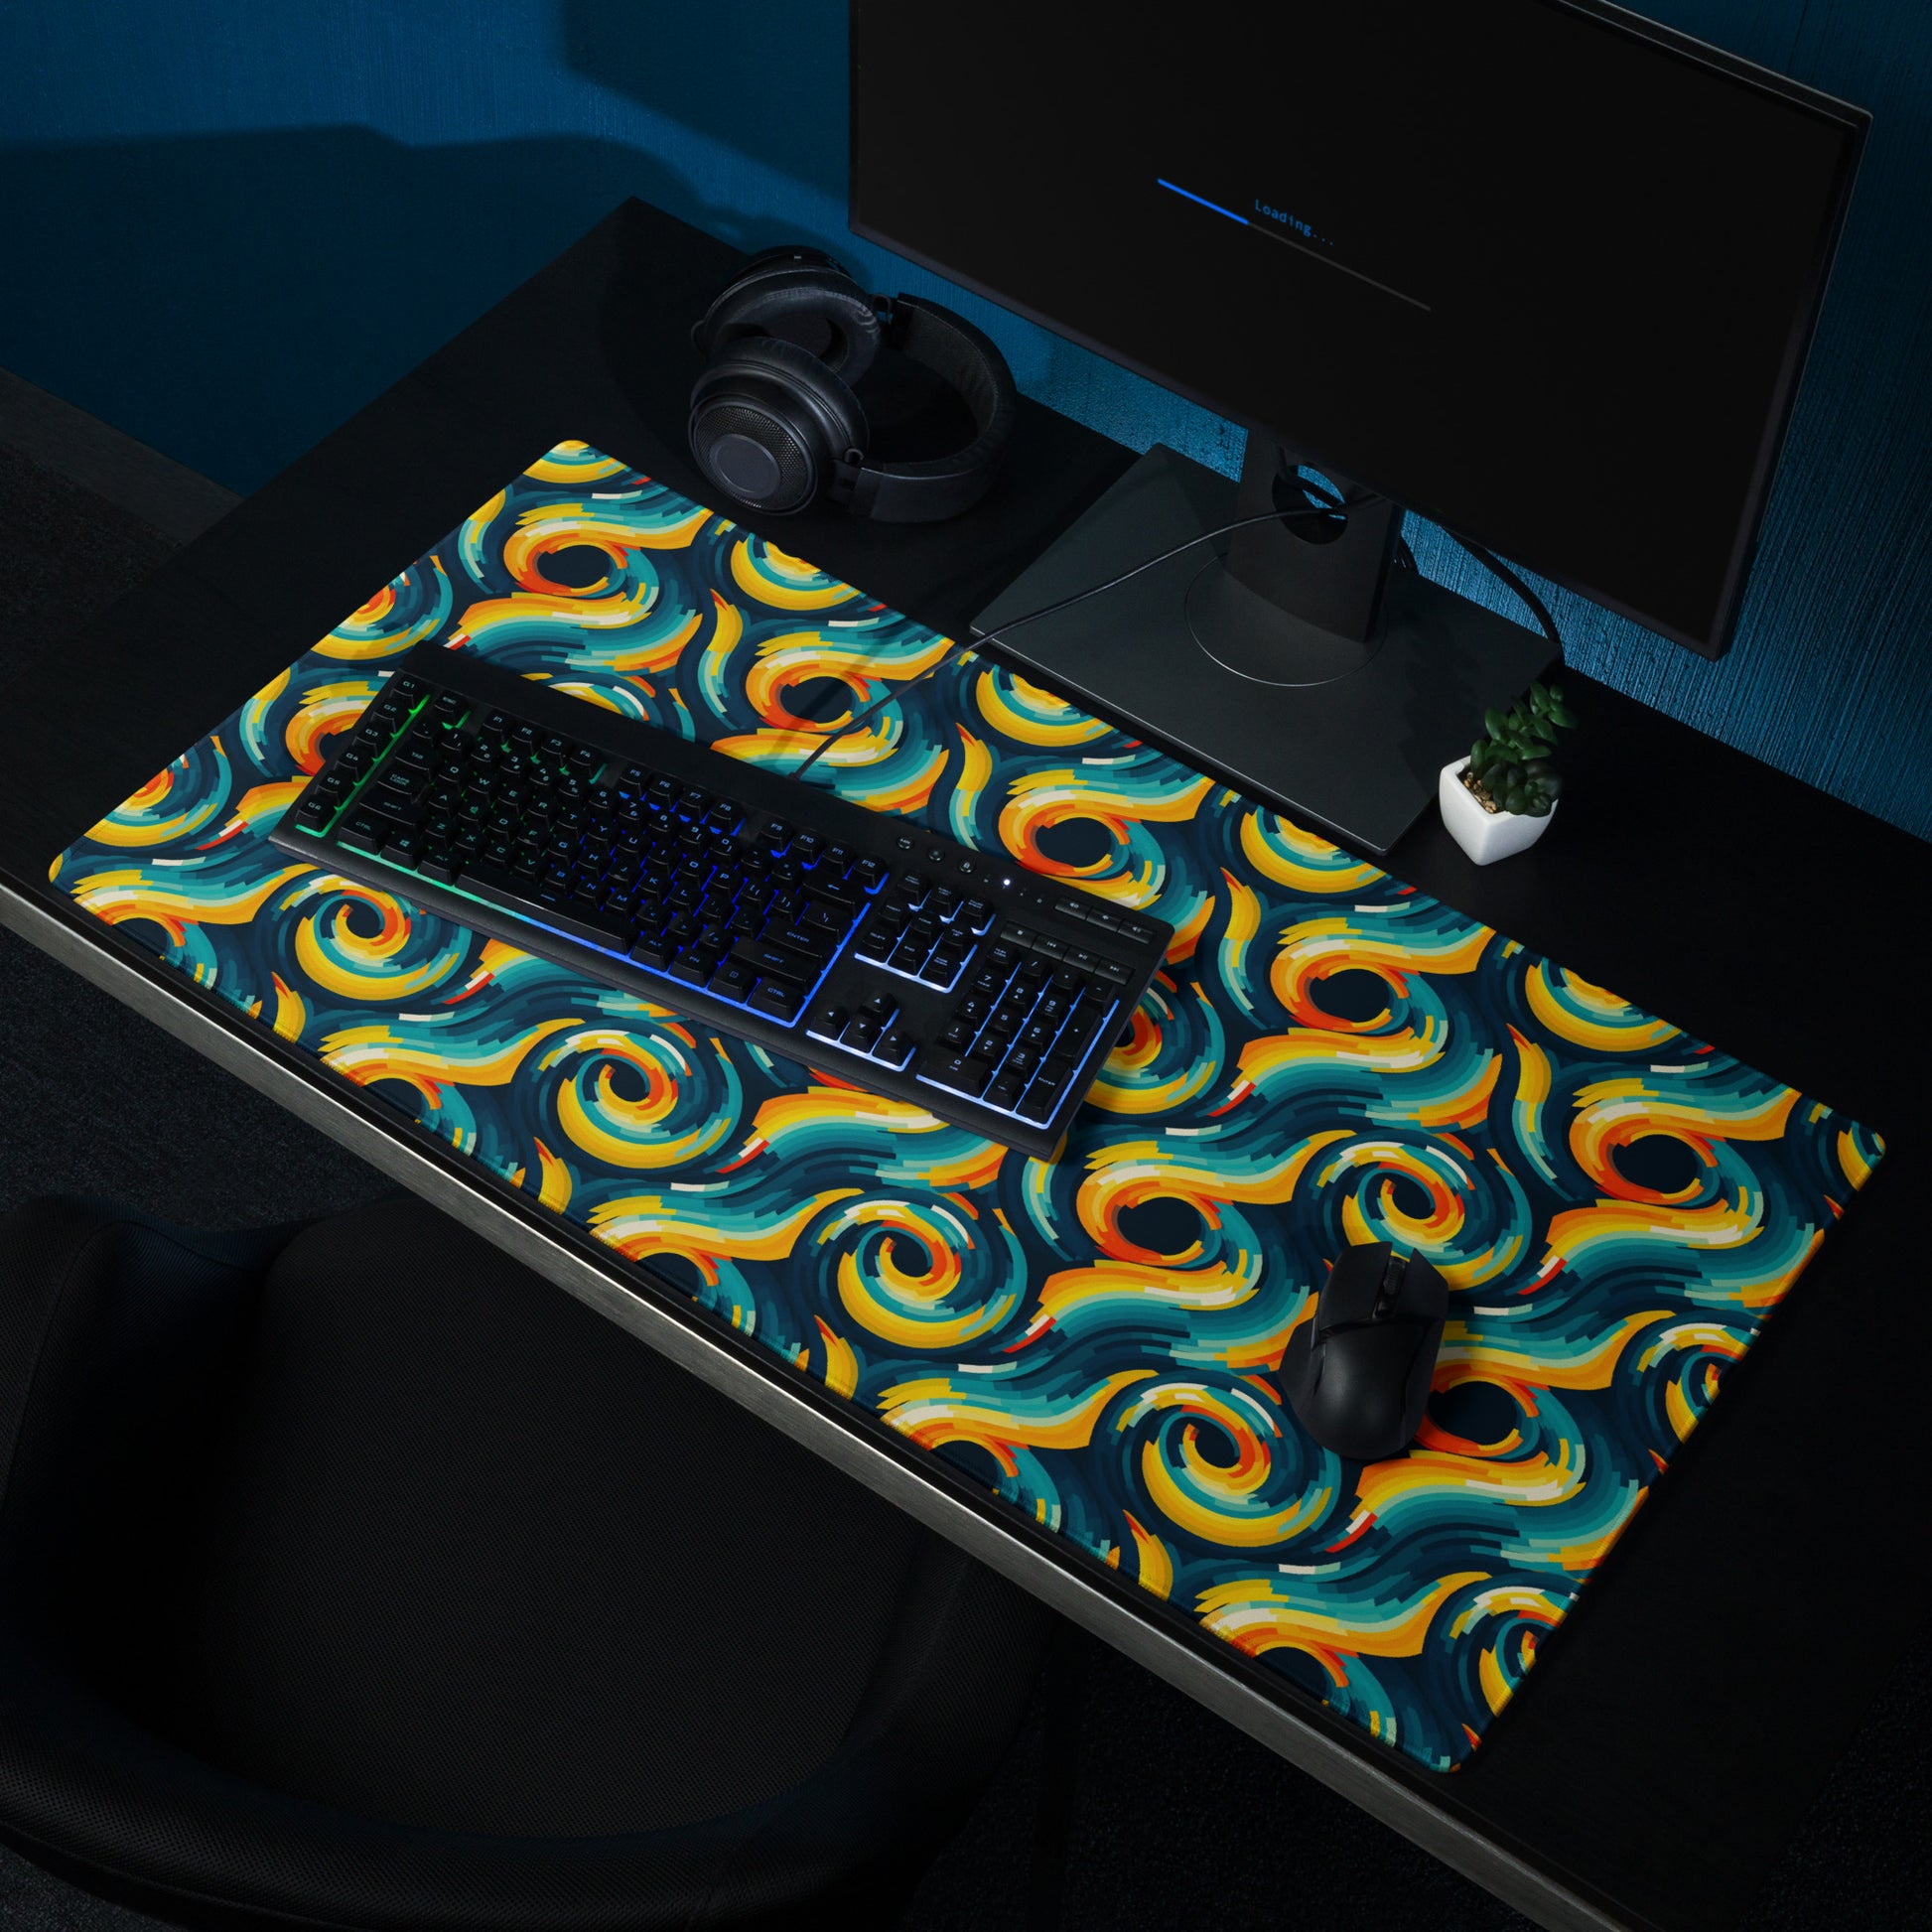  A 36" x 18" desk pad with swirls all over it shown on a desk setup. Yellow and Blue in color.